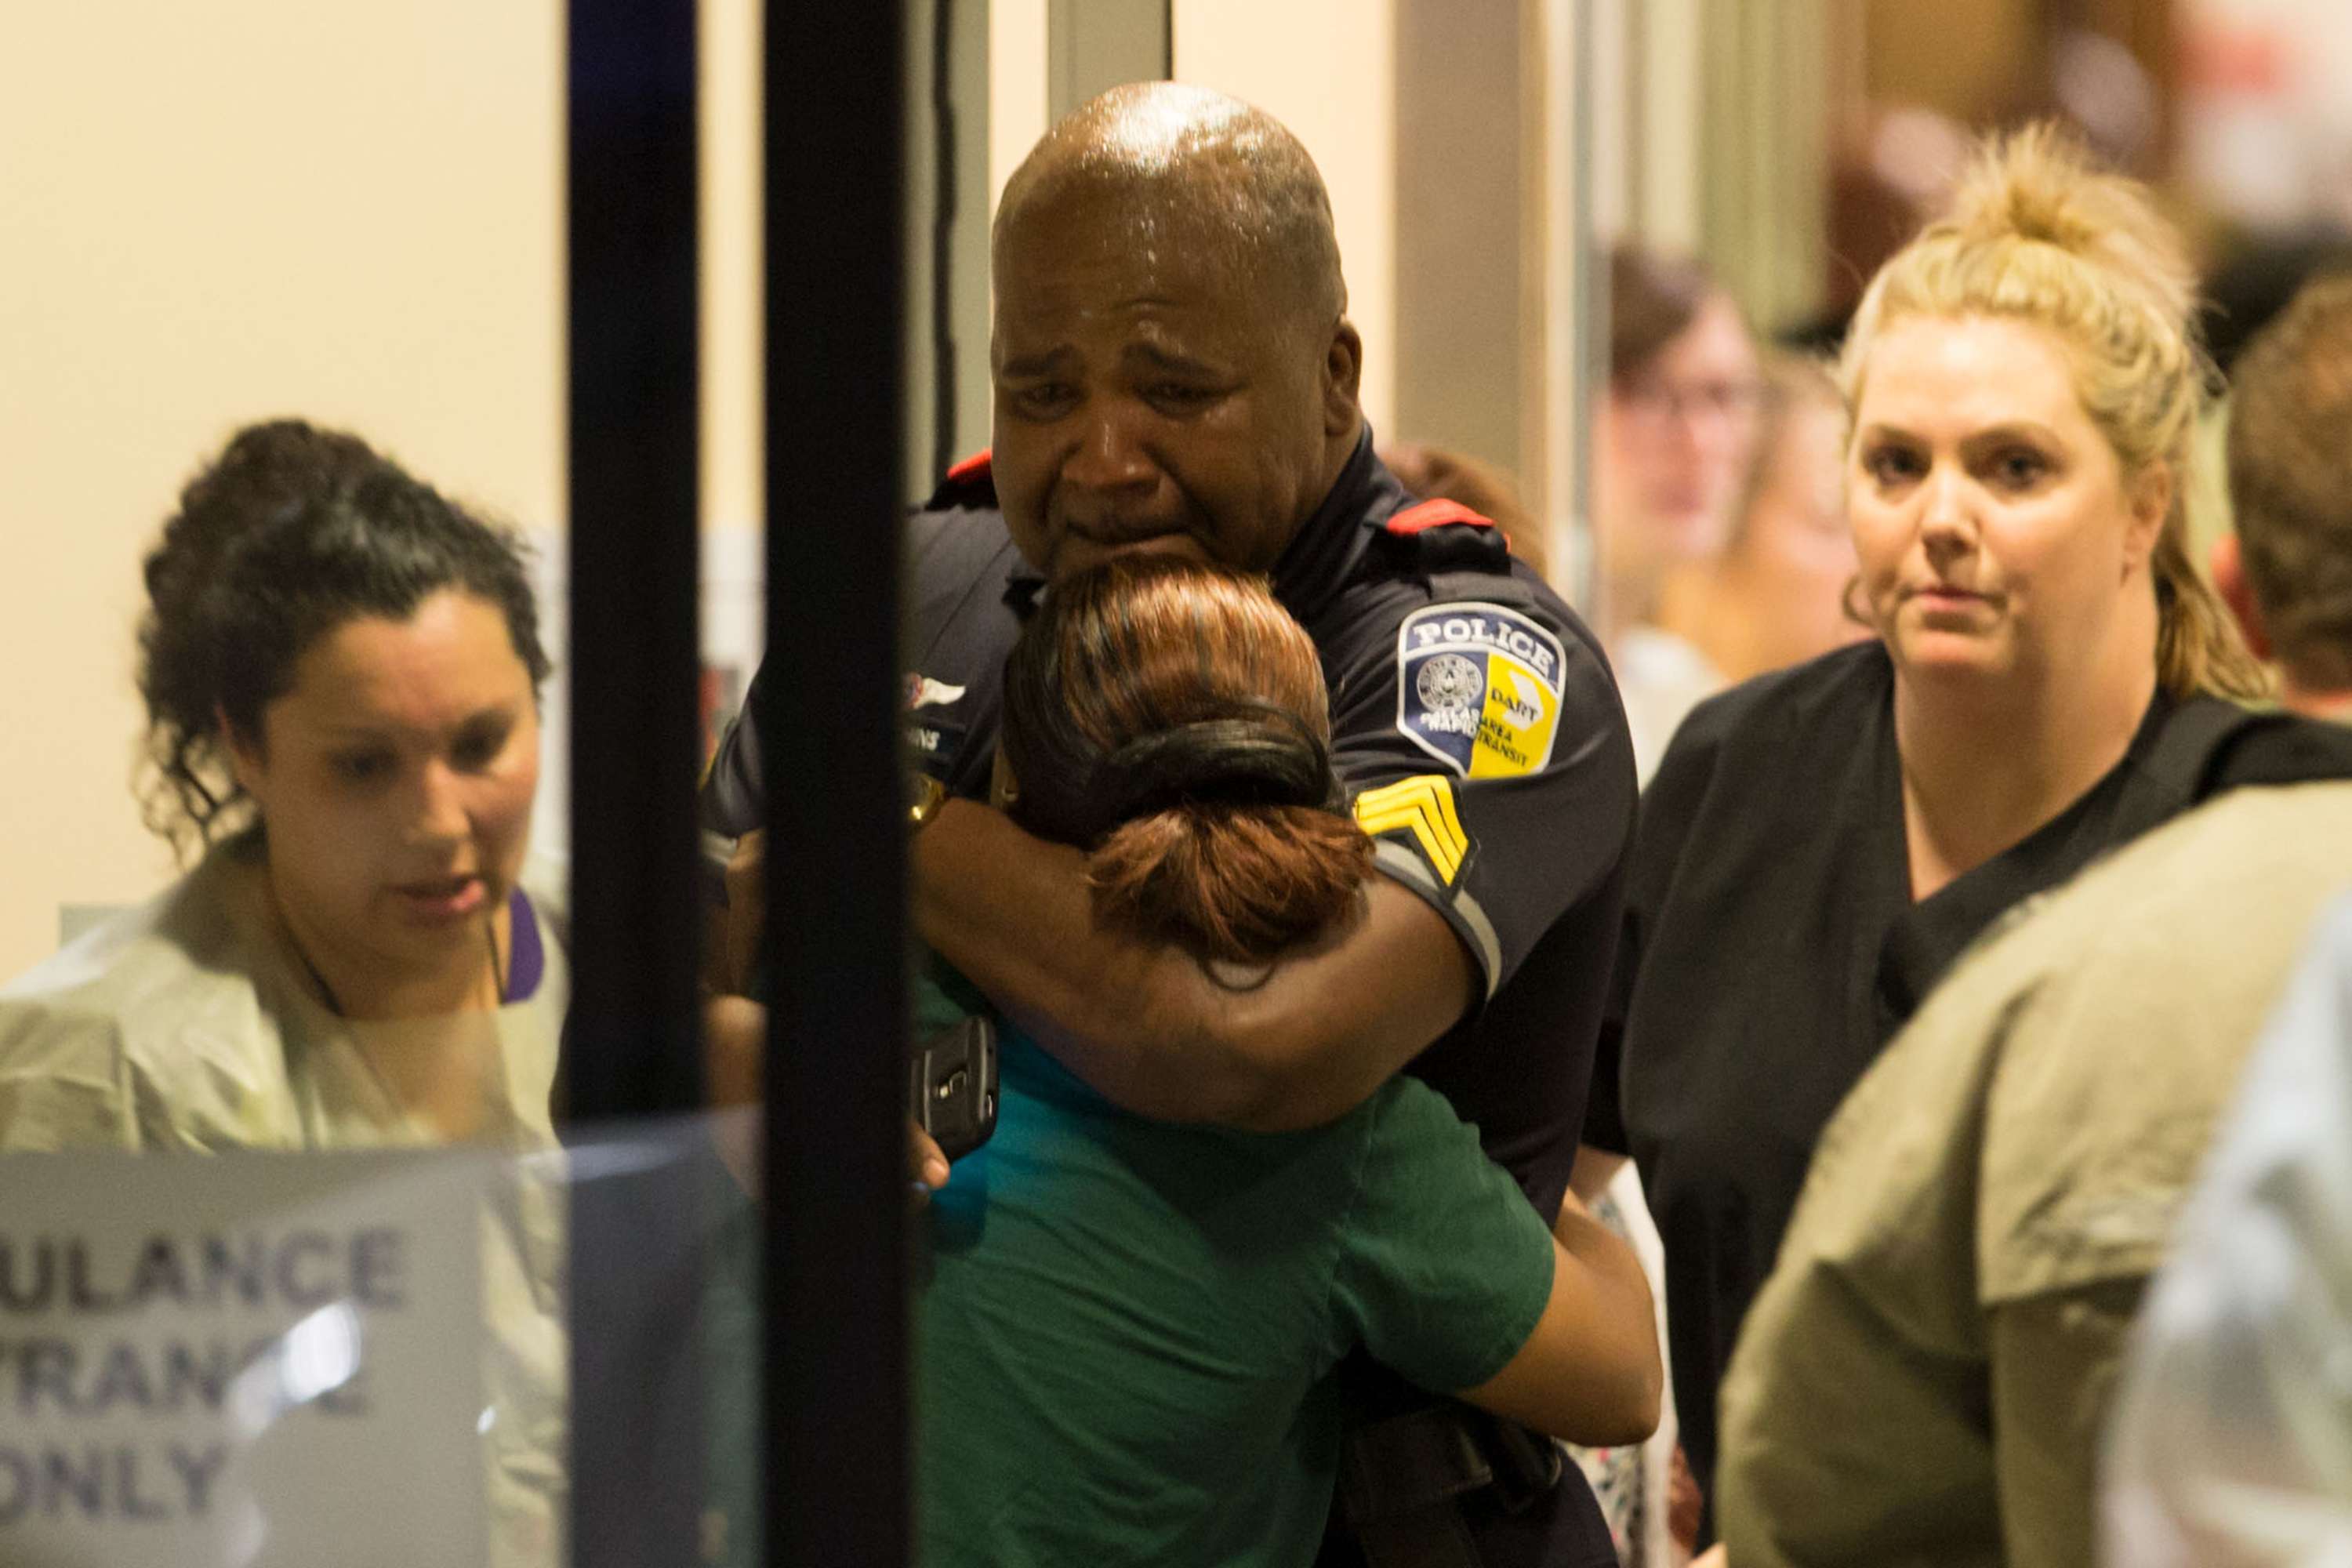 A DART (Dallas Area Rapid Transit) police officer receives comfort at Baylor University Hospital emergency room entrance on Thursday, July 7, 2016, in Dallas. Photo: TNS